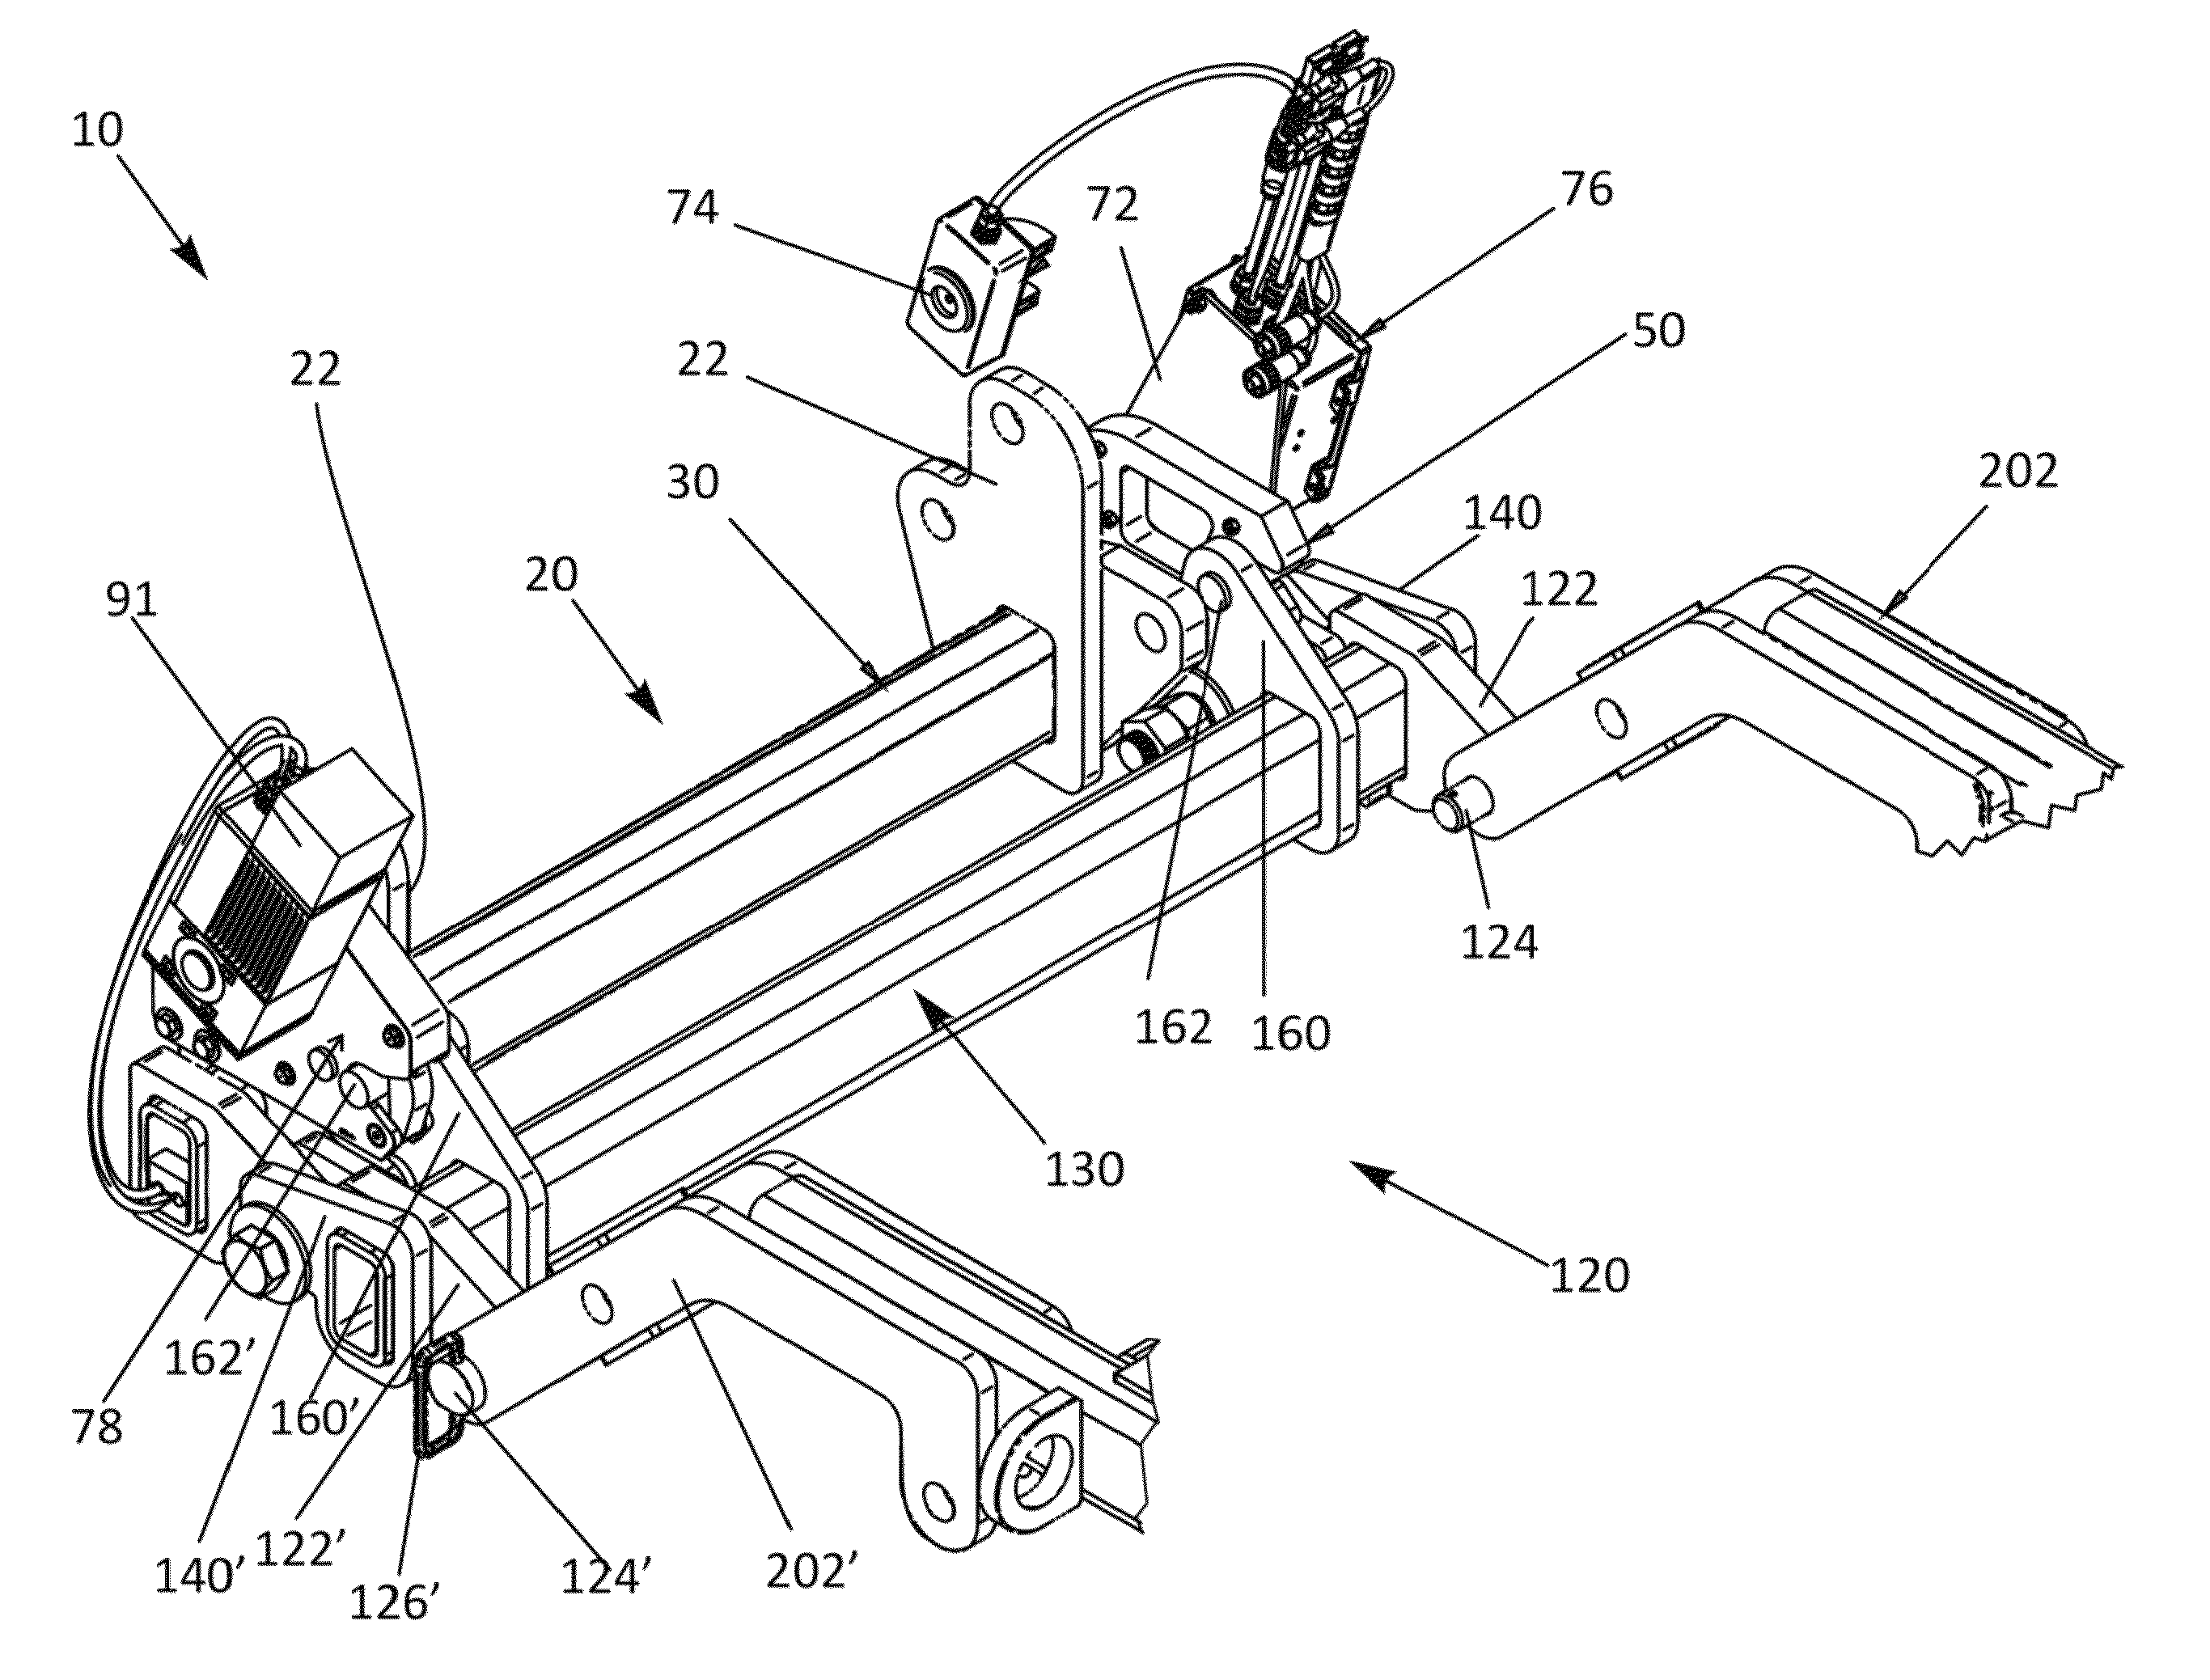 Remote jettison disconnect system for a mine roller